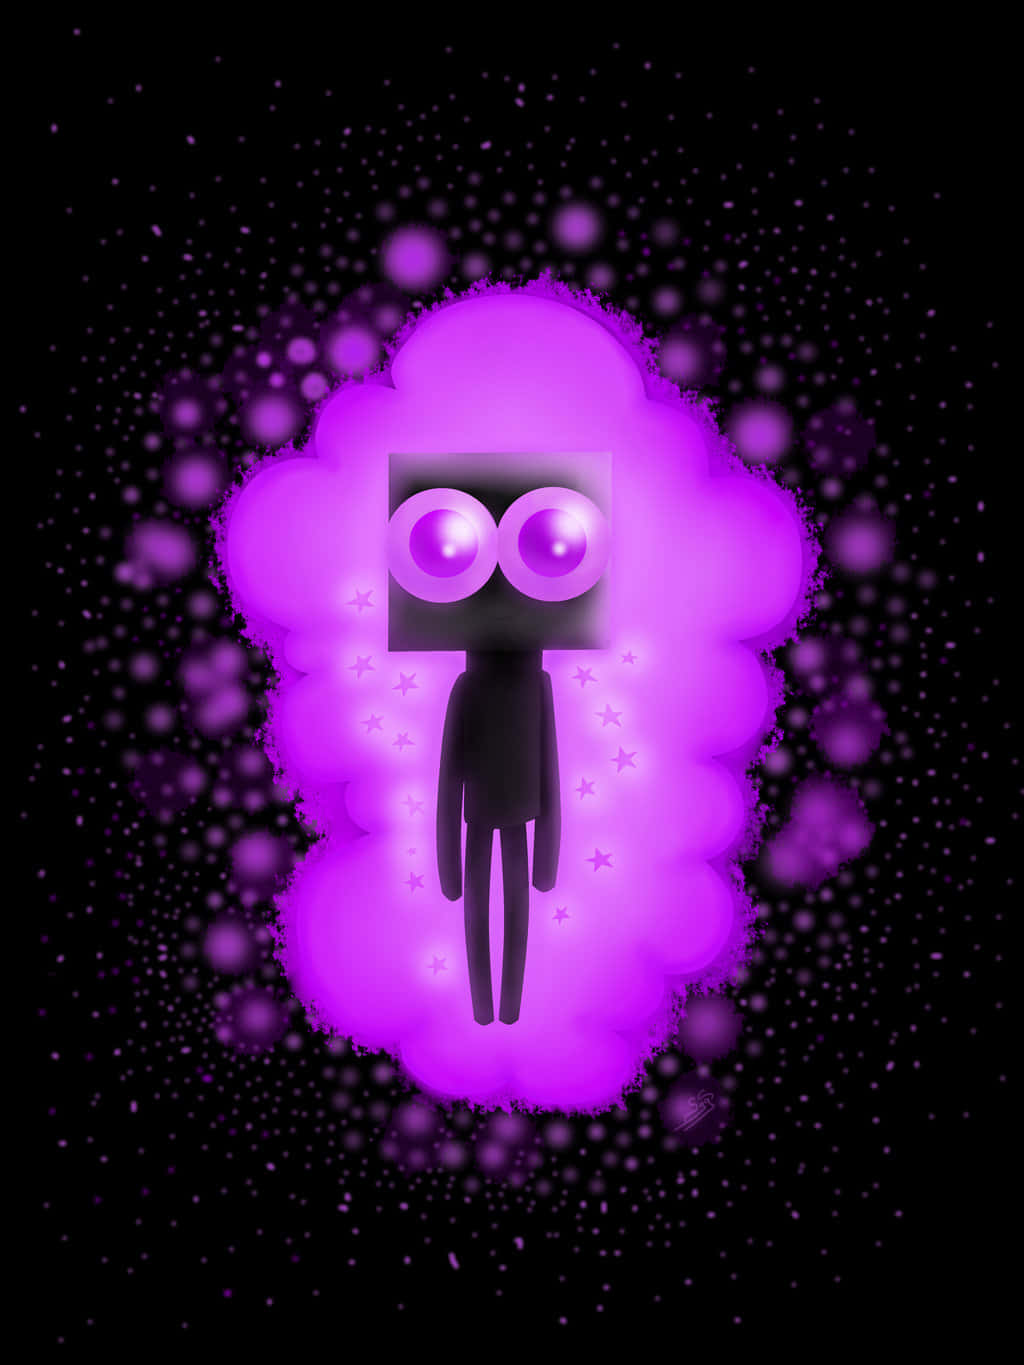 Download A Purple Robot With Eyes On A Black Background Wallpaper